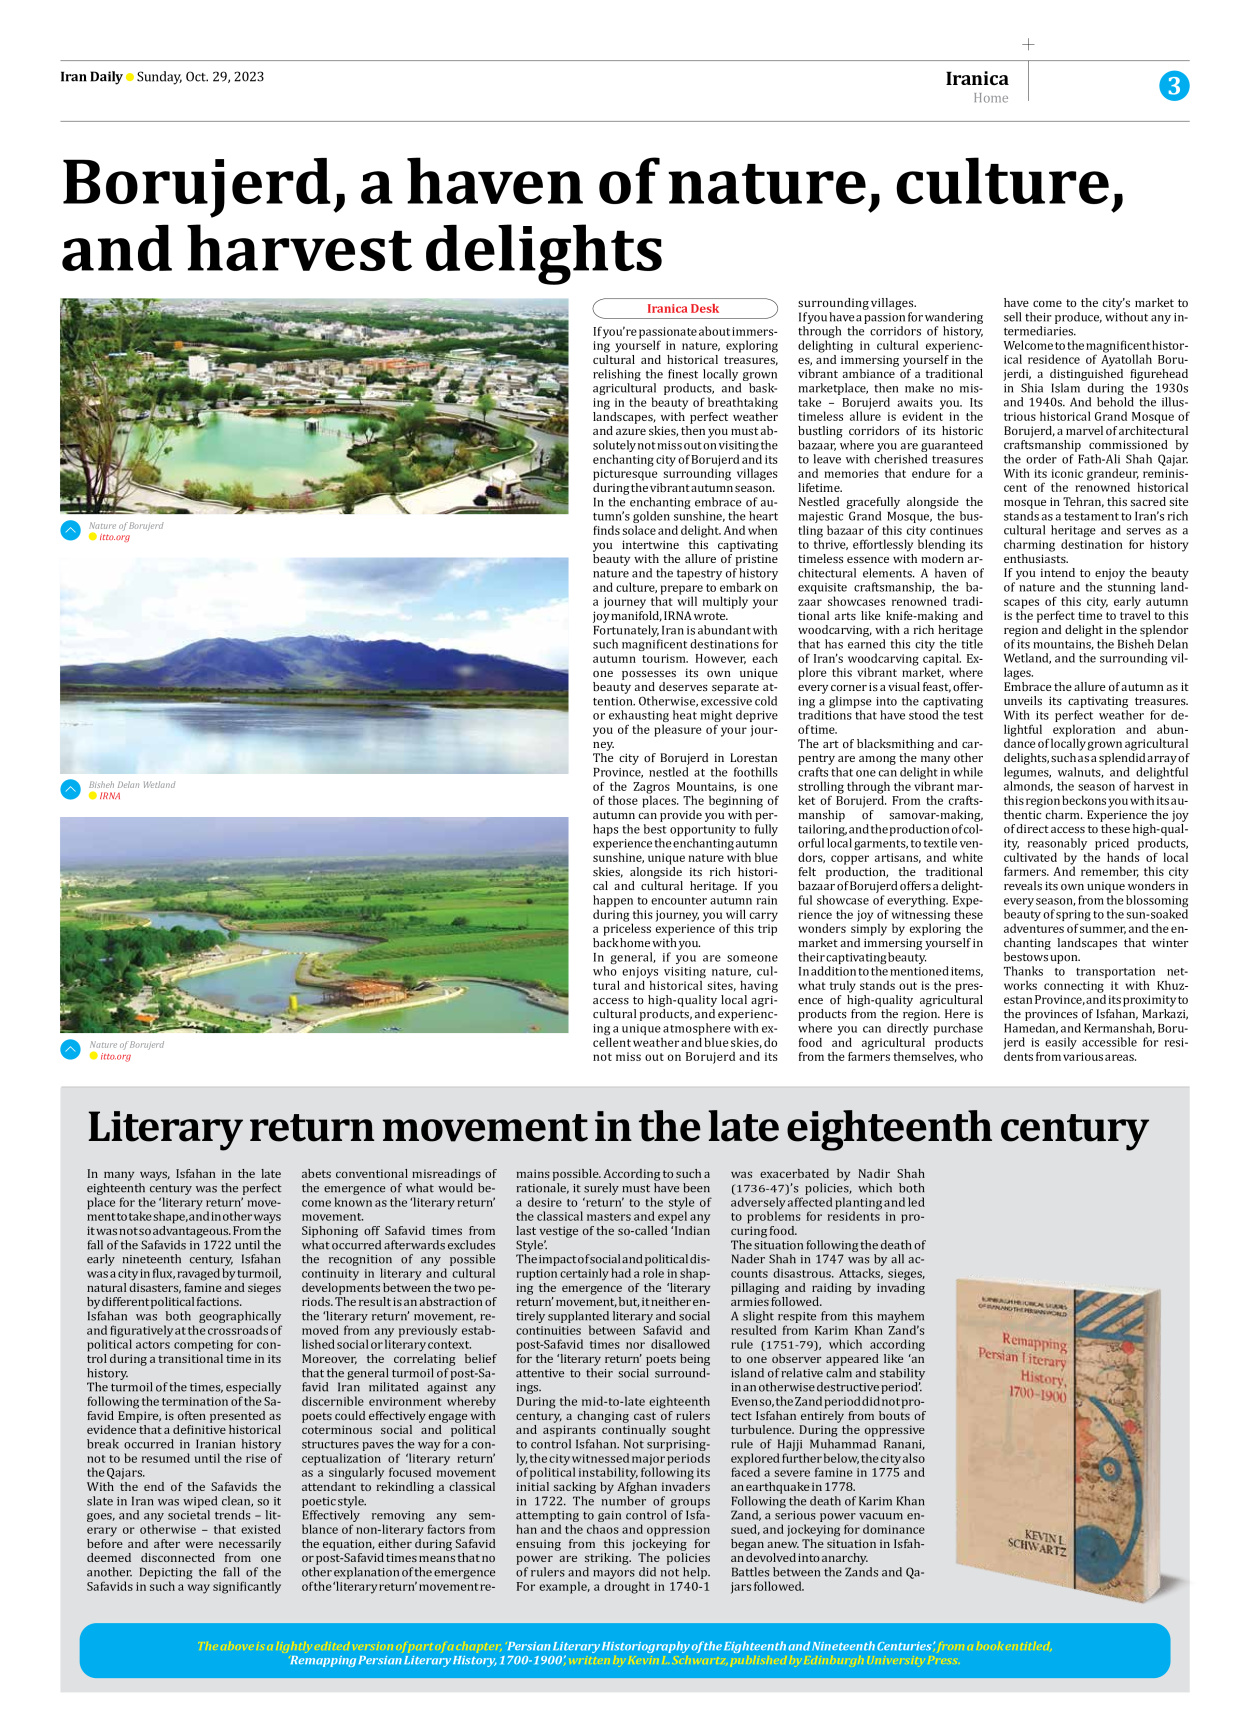 Iran Daily - Number Seven Thousand Four Hundred and Twenty - 29 October 2023 - Page 3